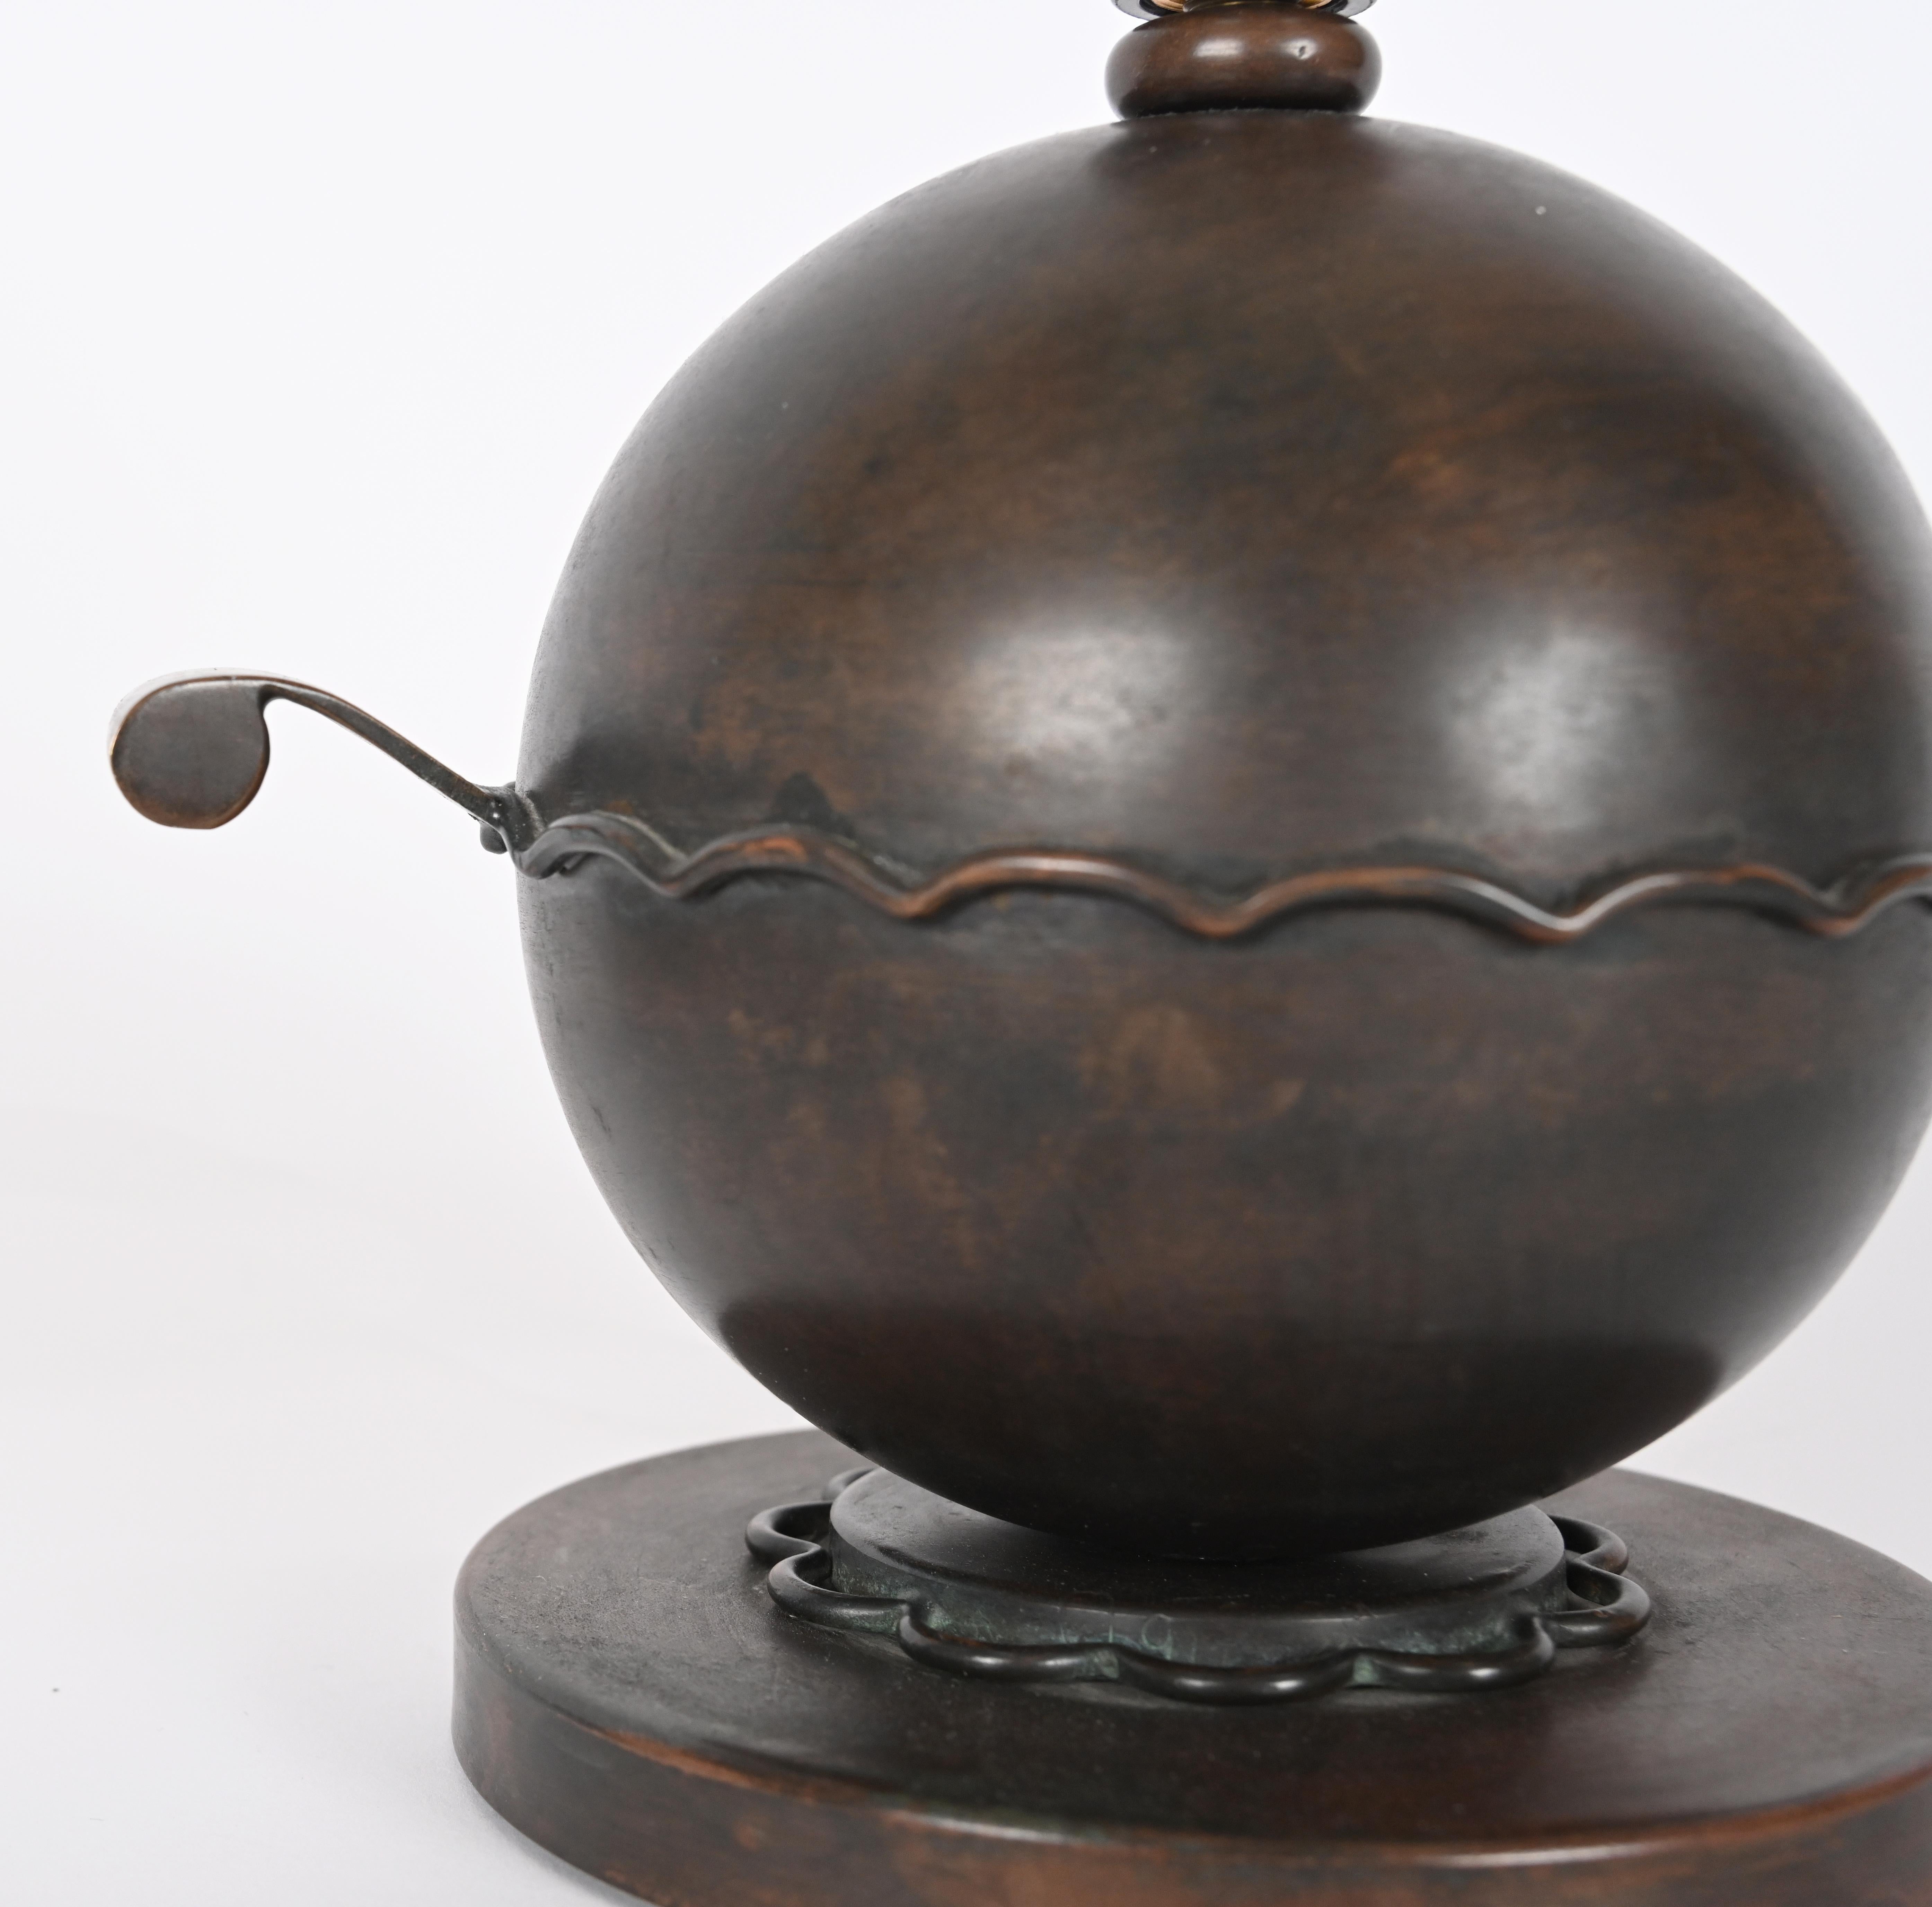 Circa early 20th Century. A spherical lamp design with curved line designs around the equator and inner ring of the base. The globe has two handles extending out with minimal rust along the surface.

Base Height: 7